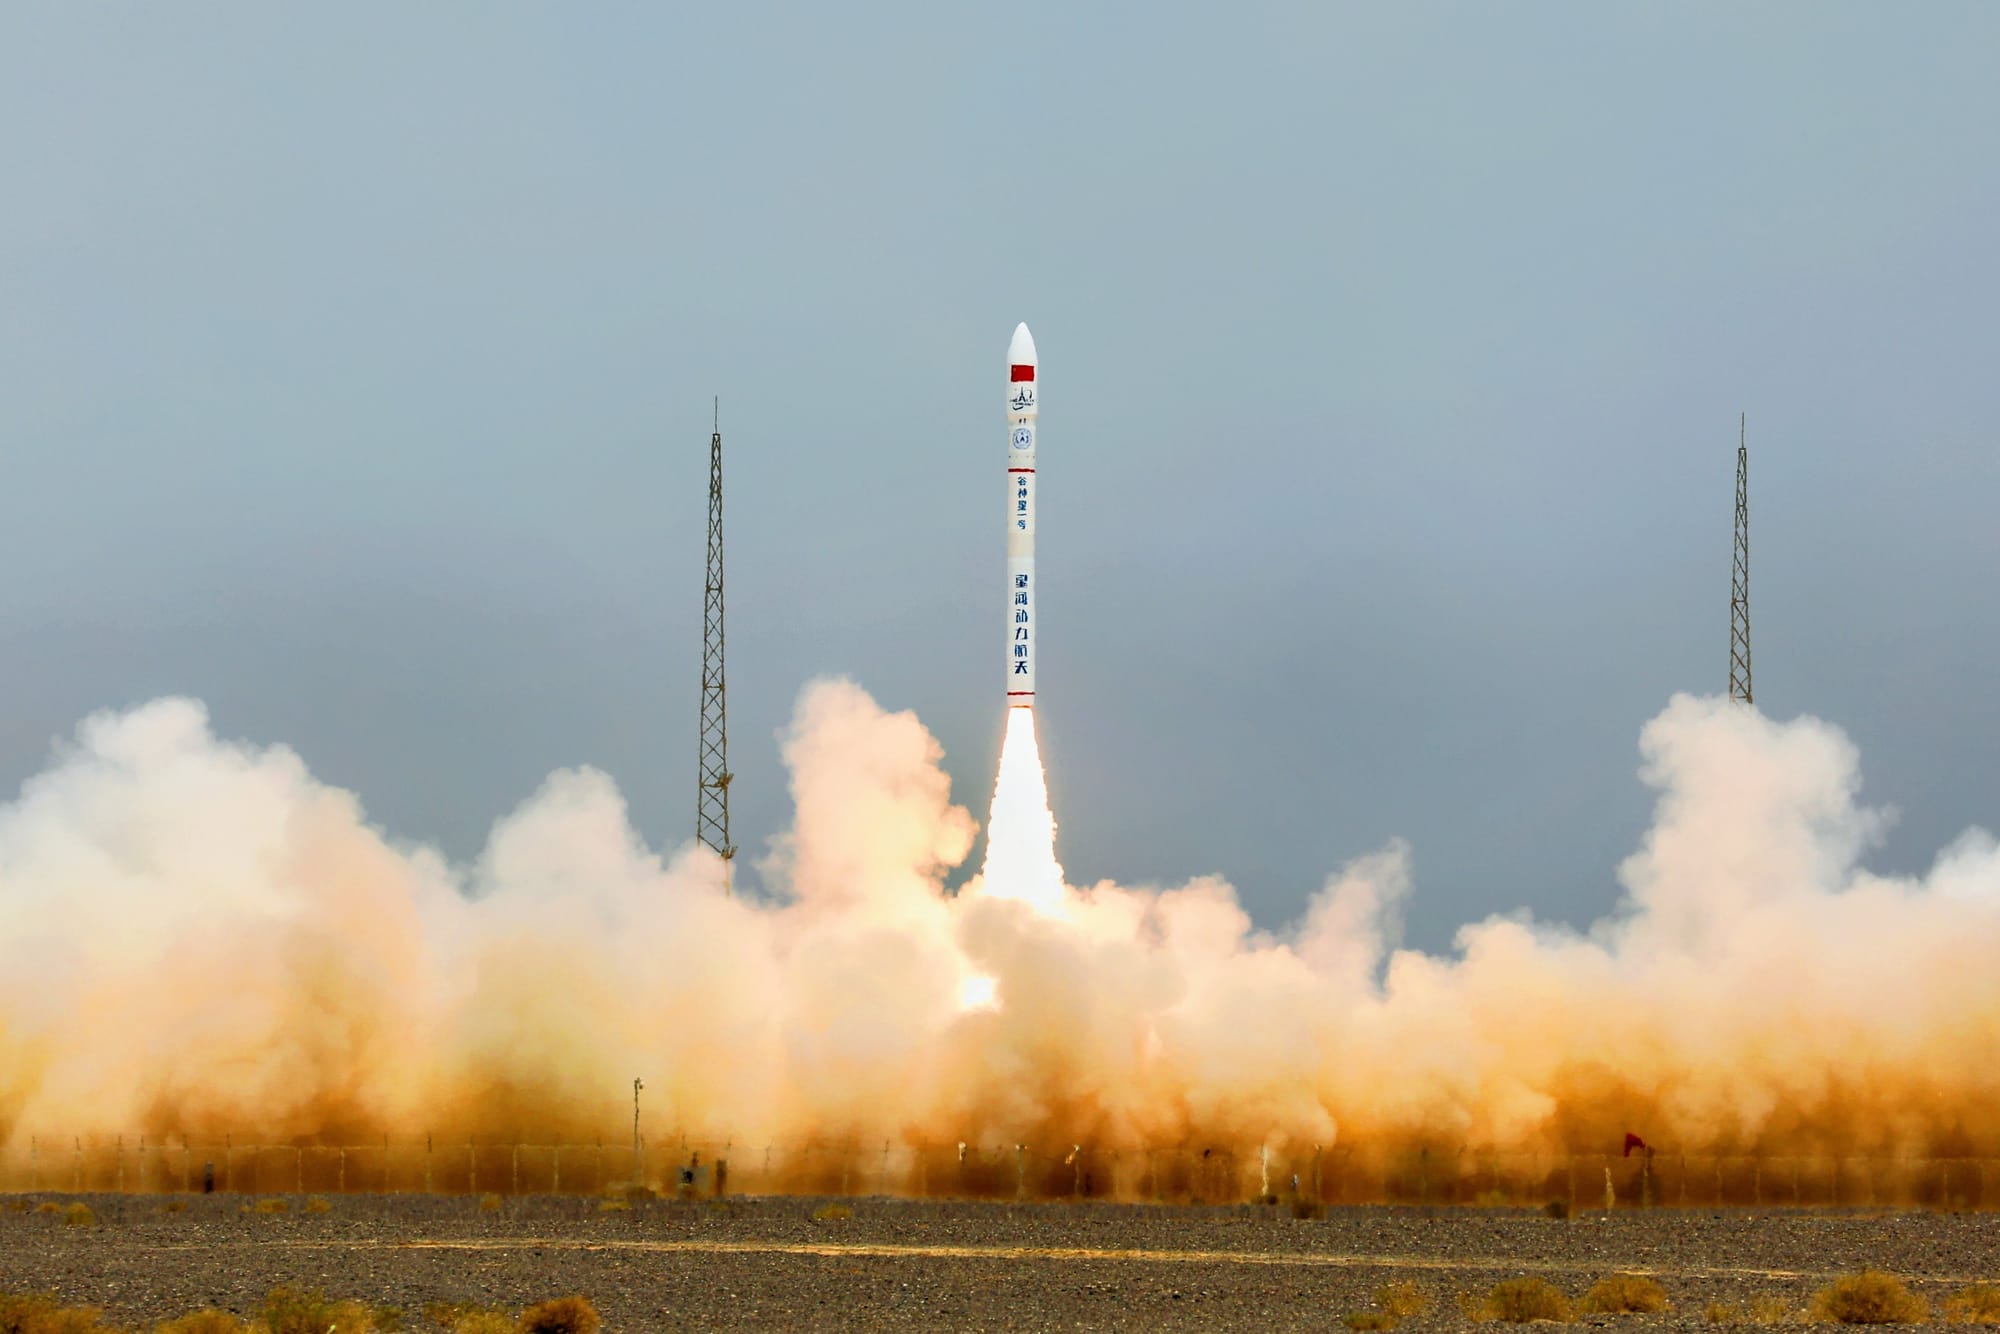 Ceres-1 Y13 lifting off from Launch Area 95 at the Jiuquan Satellite Launch Center.